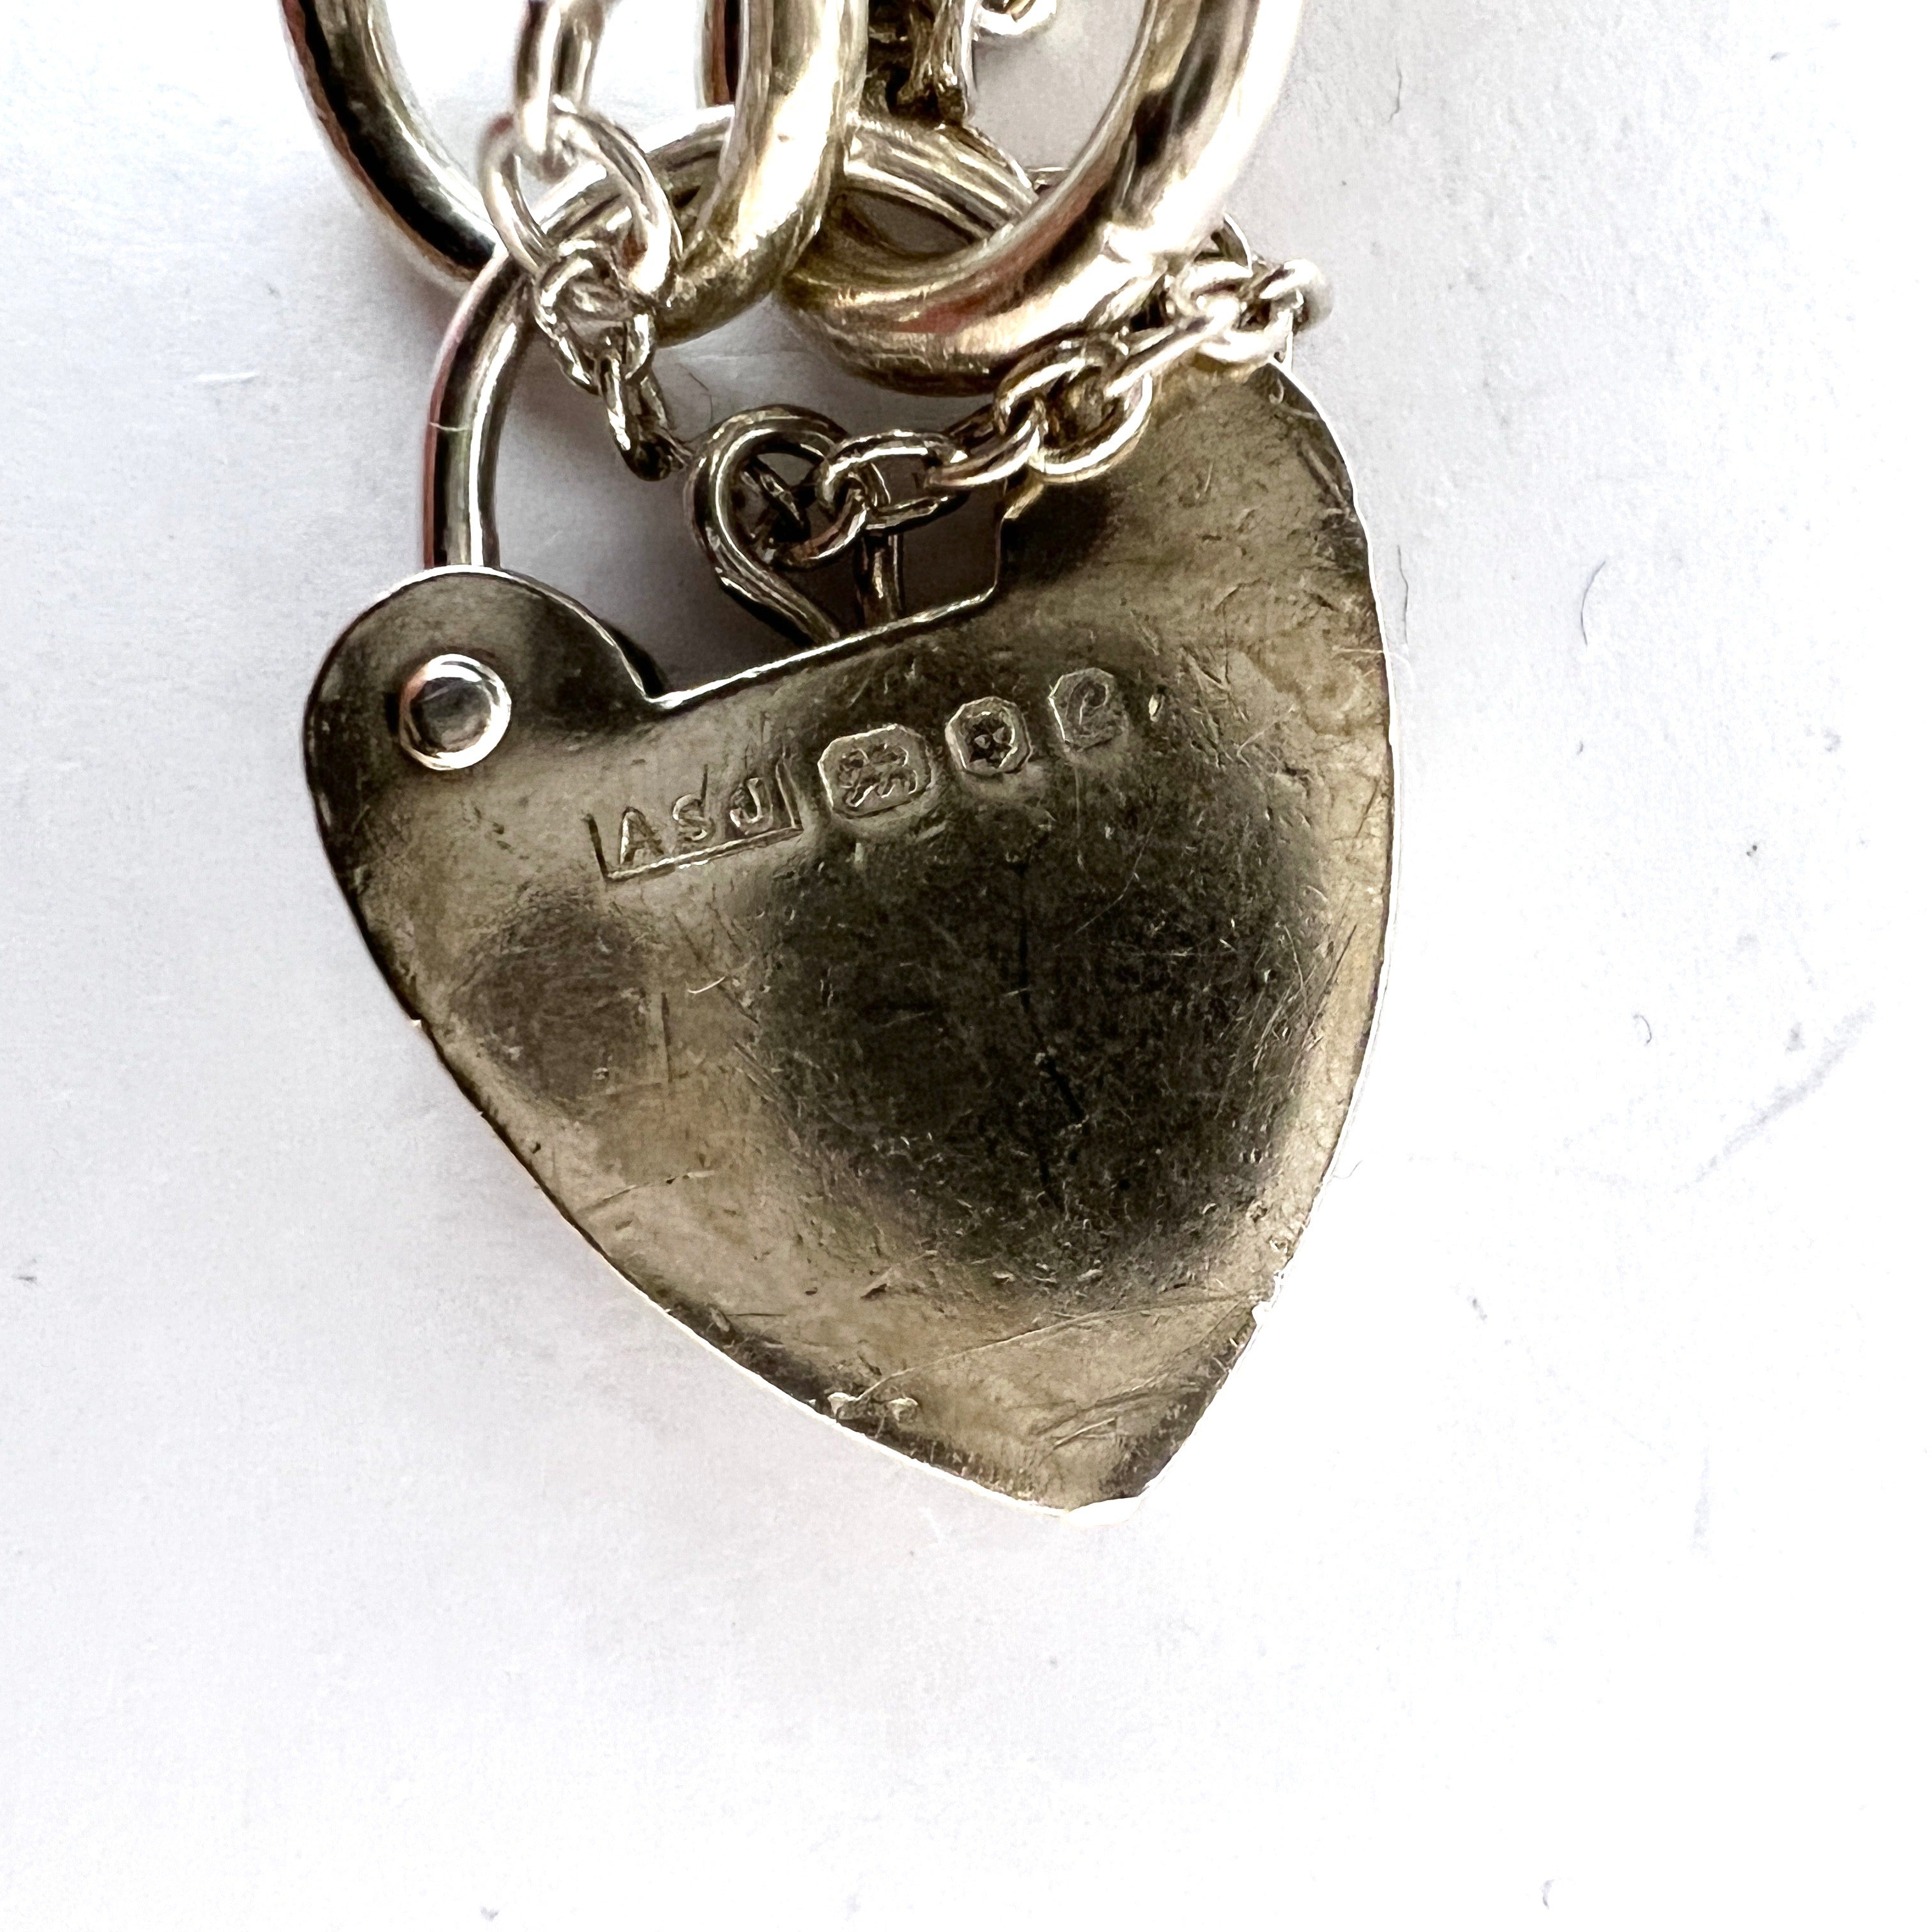 Lock With Love Key Chain Necklace Antique Silver Padlock -  Sweden